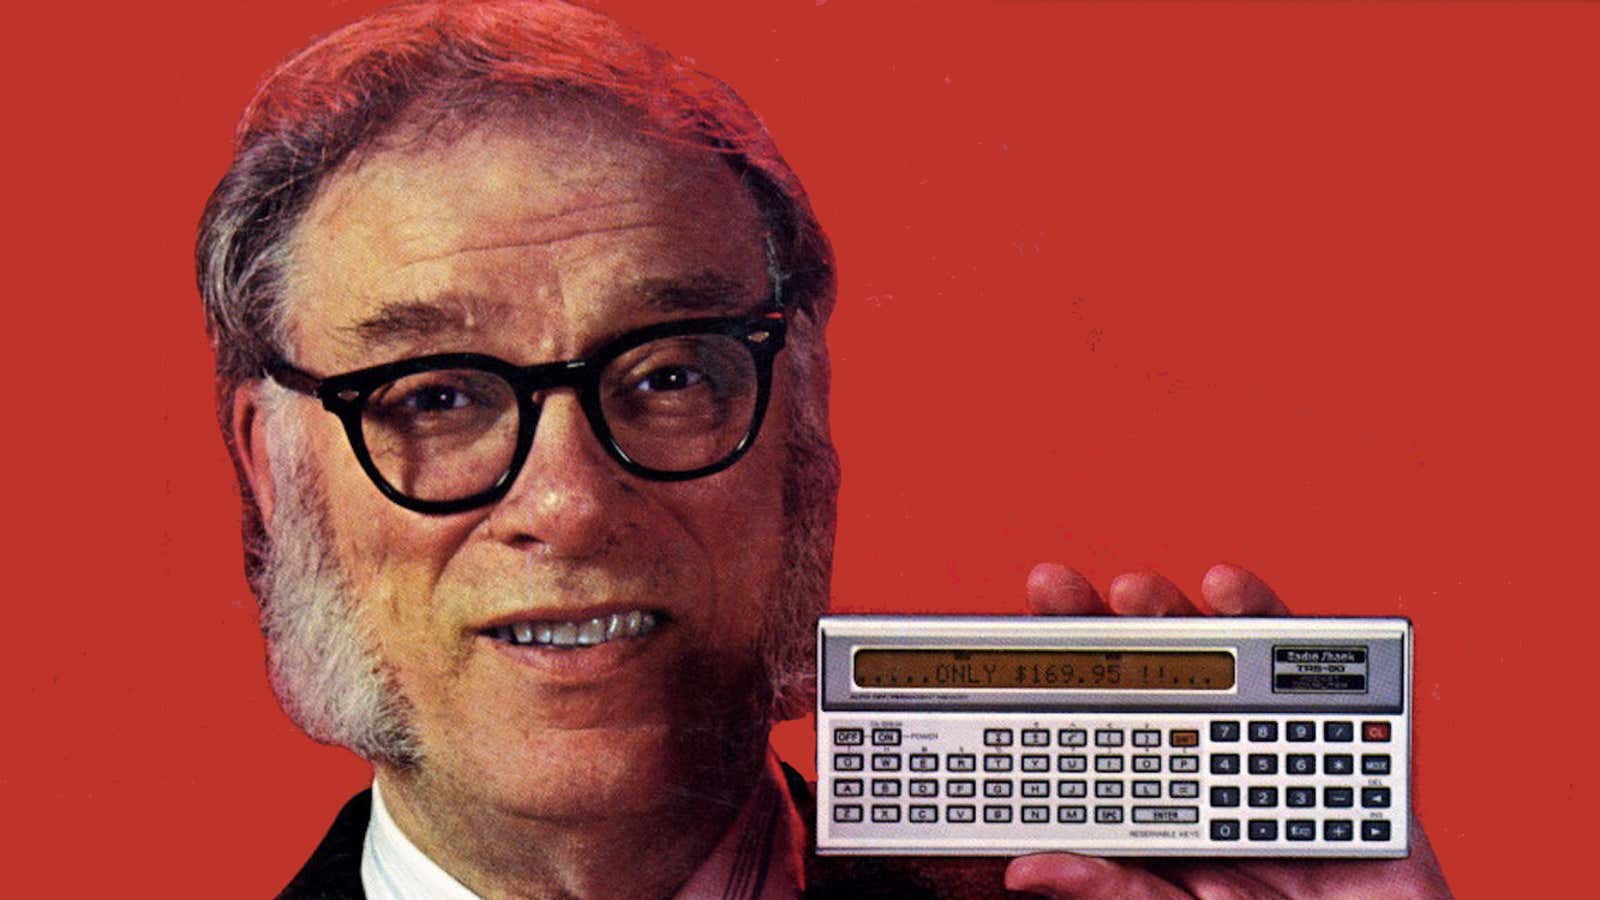 Author Isaac Asimov endorsing Radioshack’s TRS-80, as part of a larger ad campaign for the company’s own-brand products.